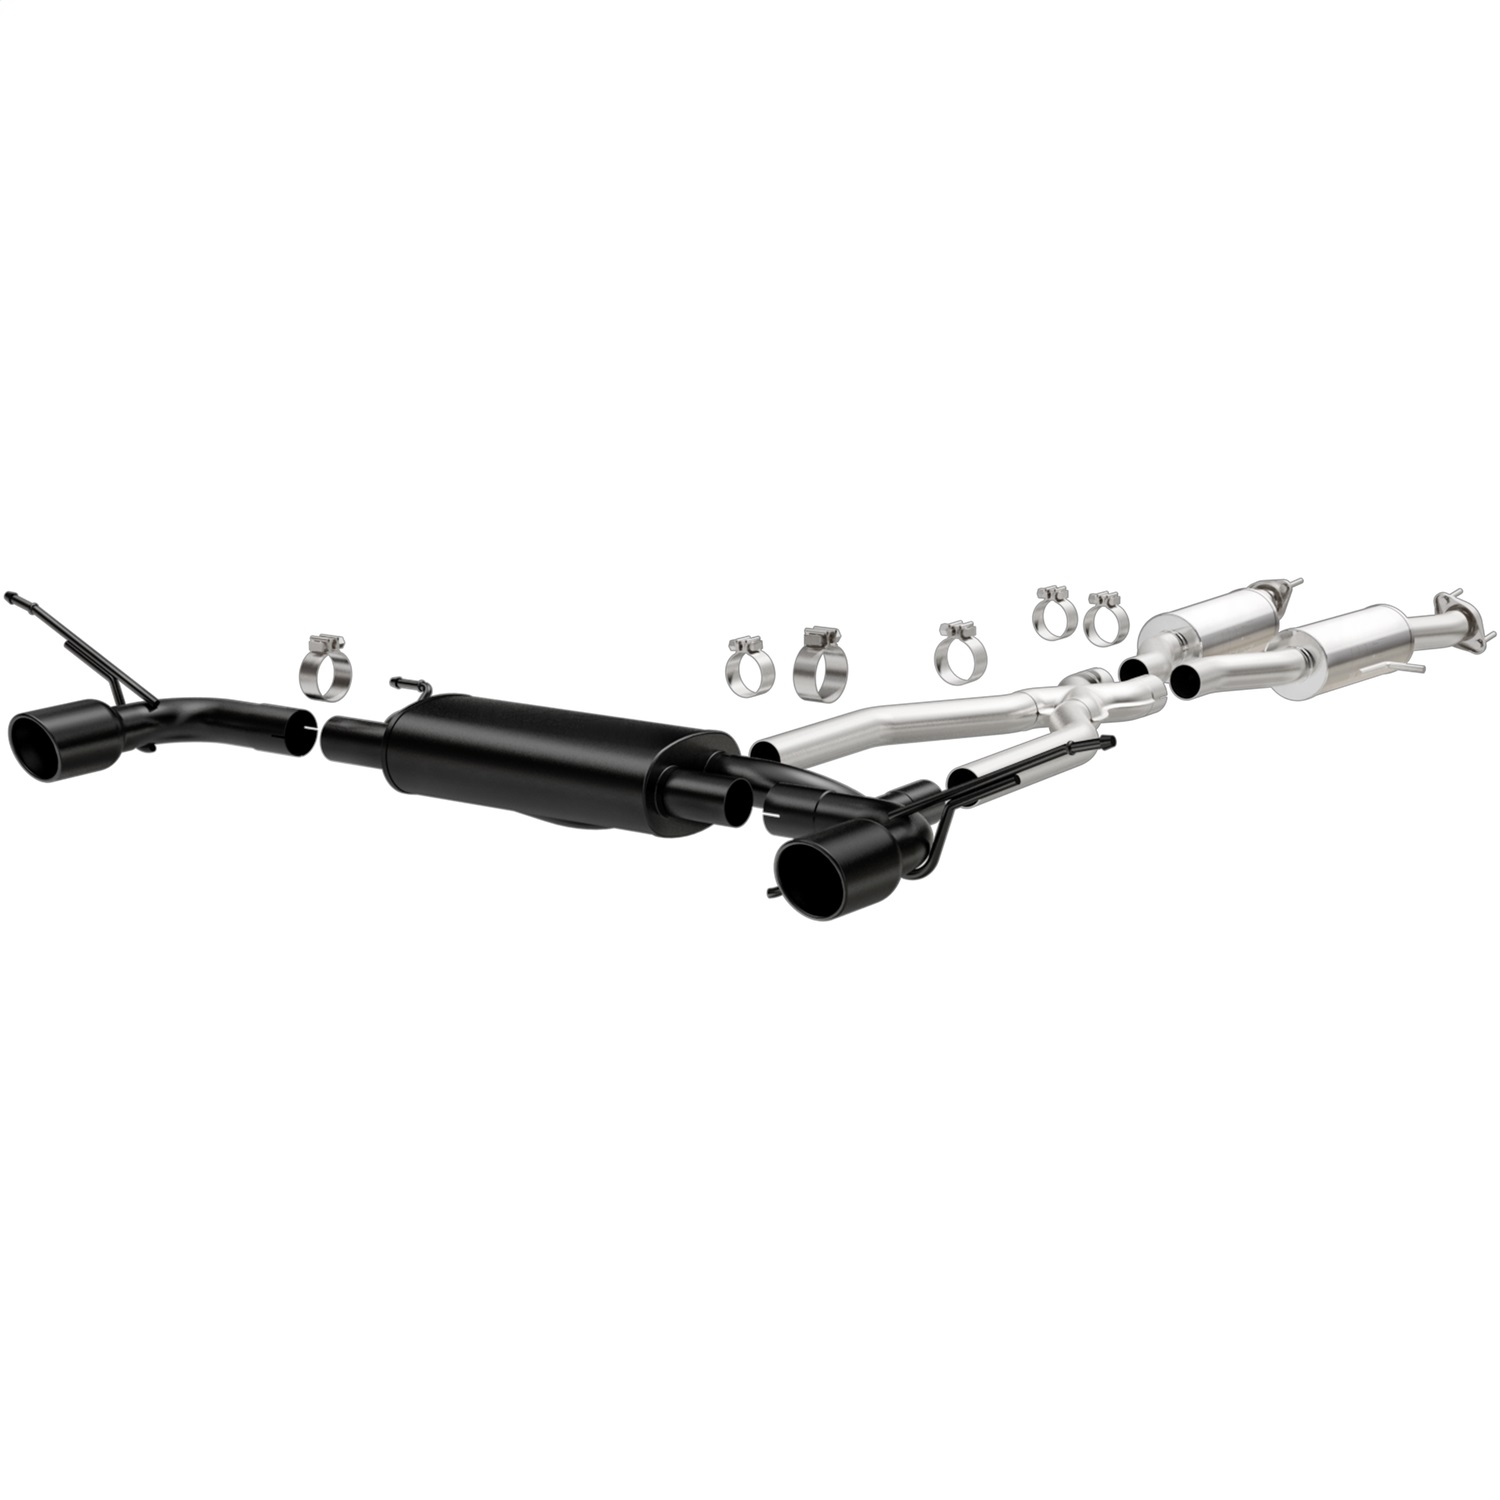 MagnaFlow Exhaust Products Magnaflow Performance Exhaust 19216 Exhaust System Kit